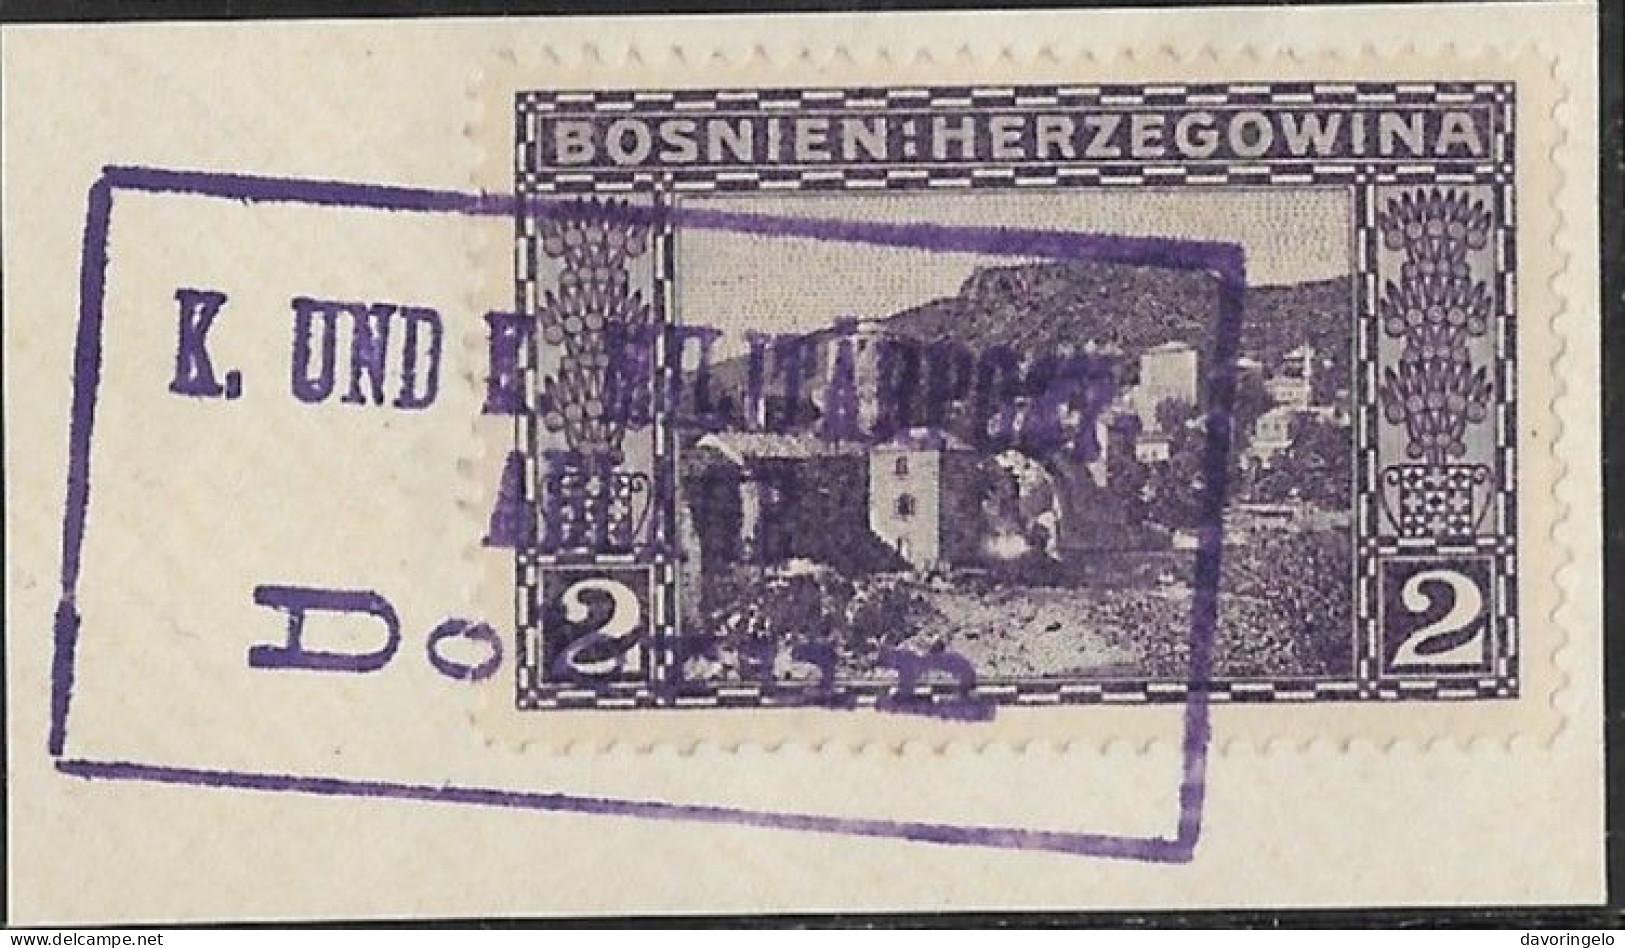 Bosnia-Herzegovina/Austria-Hungary, Catting Out, Auxiliary Post Office/Ablage DOBRUN, Type A1 - Bosnien-Herzegowina